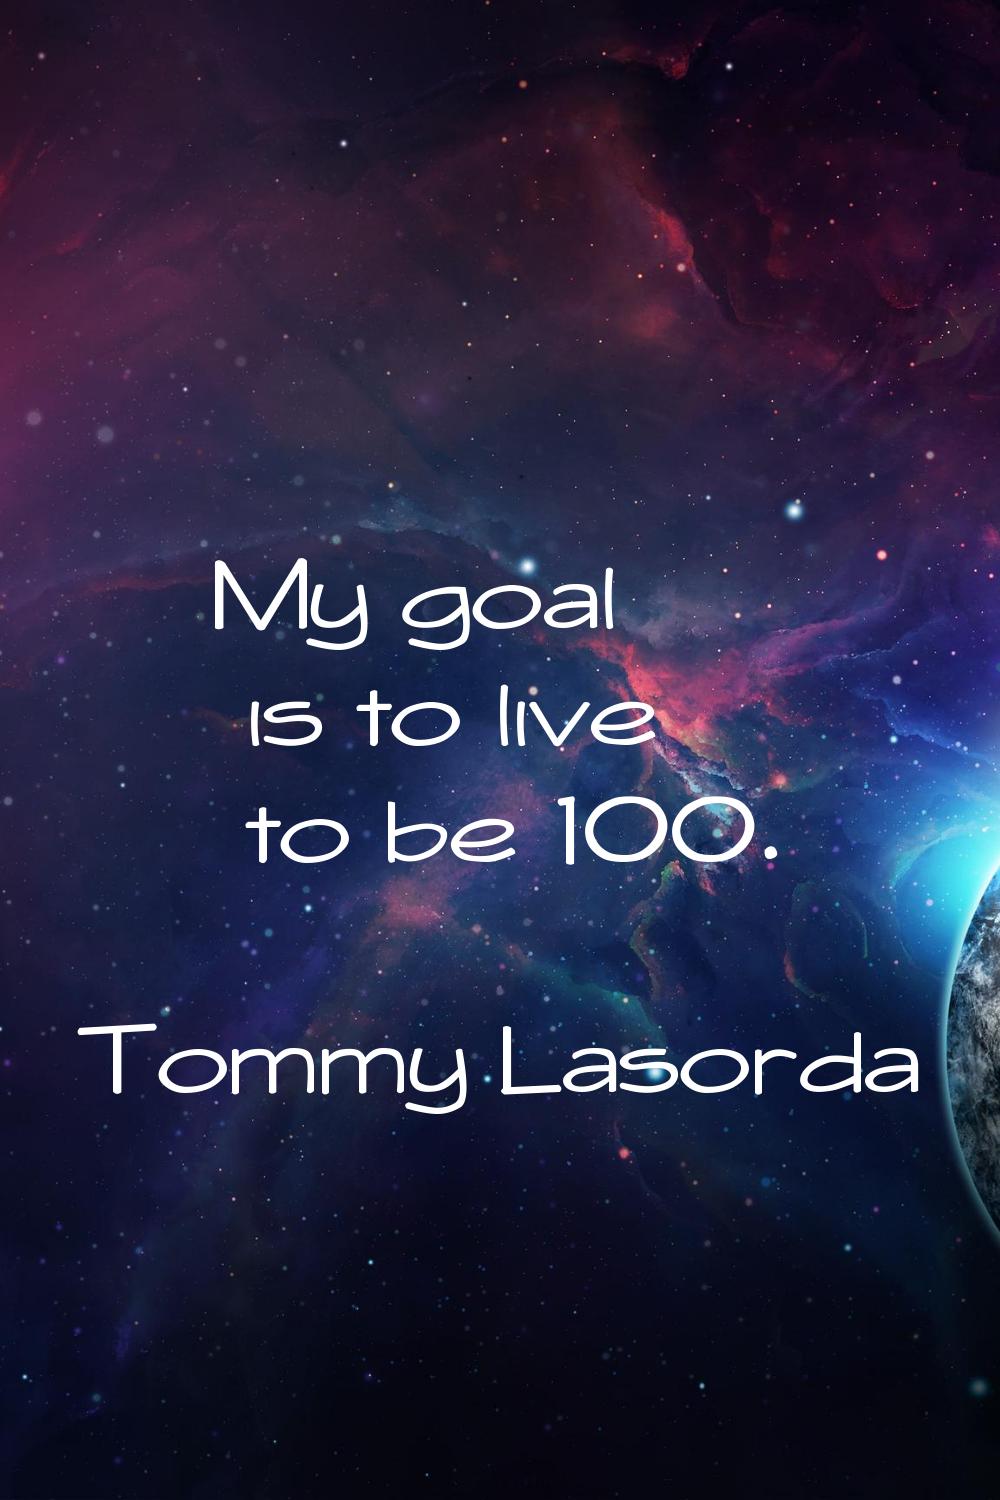 My goal is to live to be 100.